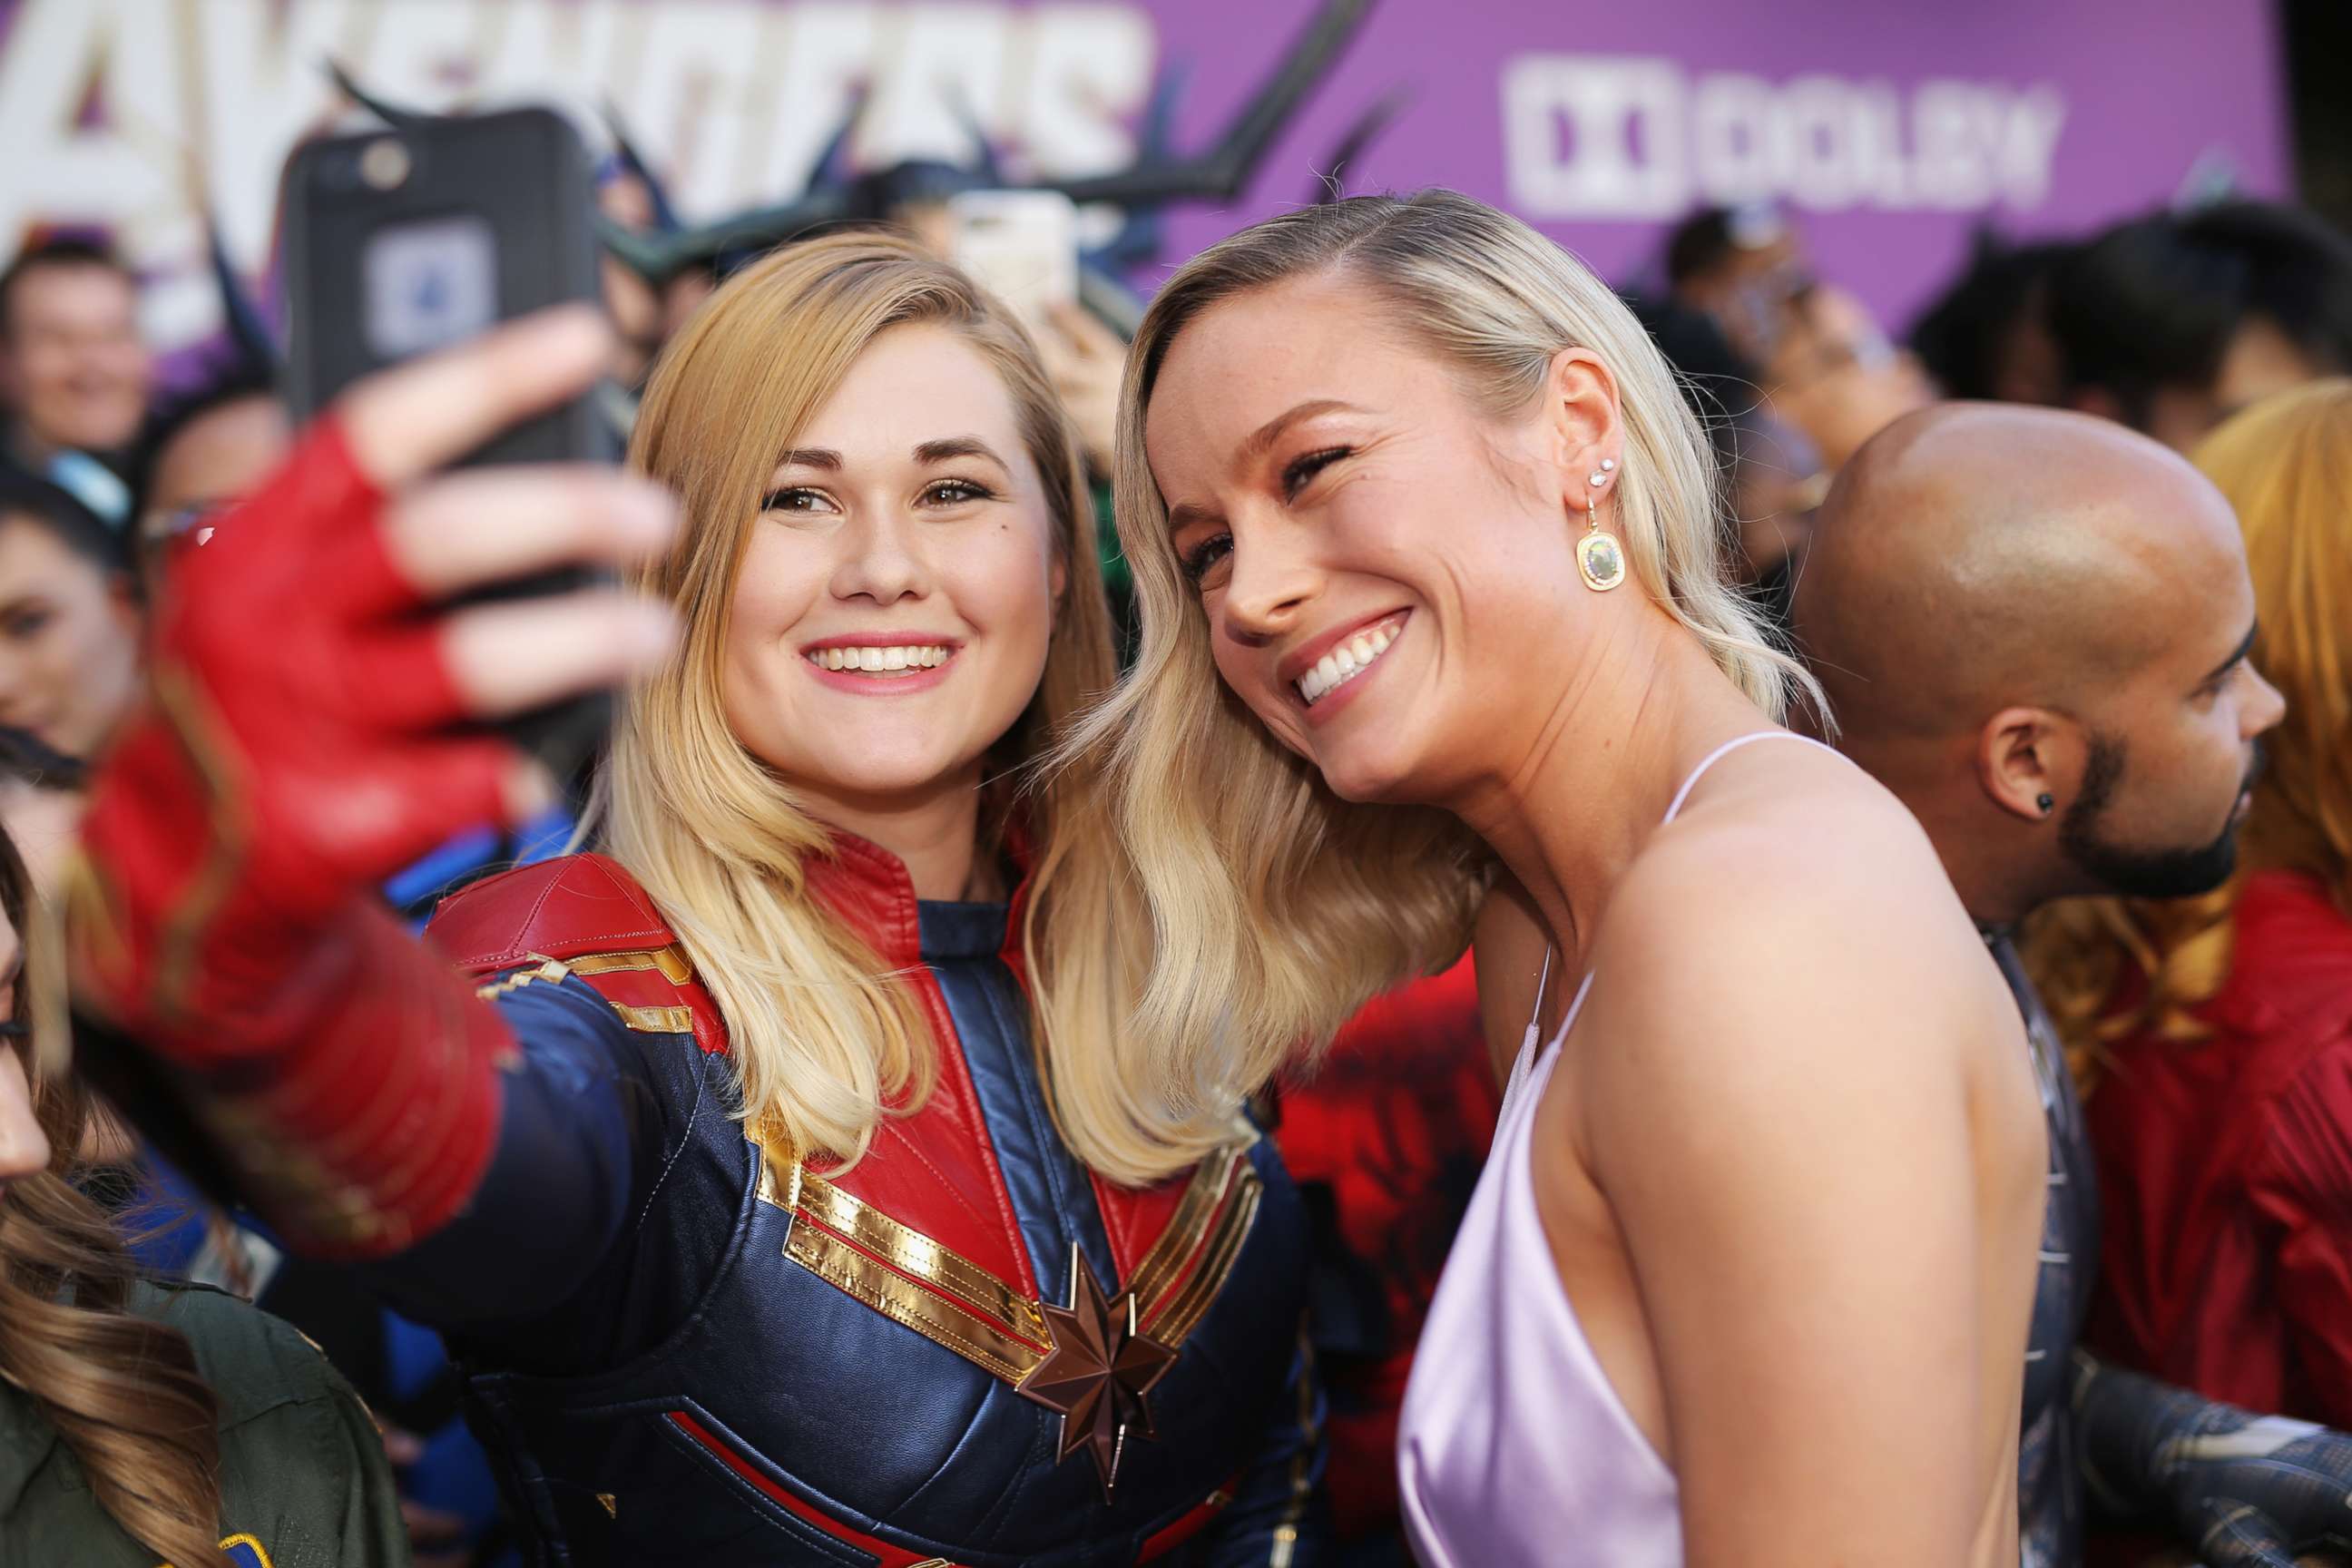 PHOTO: Brie Larson, right, attends the Los Angeles World Premiere of Marvel Studios' "Avengers: Endgame" at the Los Angeles Convention Center on April 23, 2019 in Los Angeles.